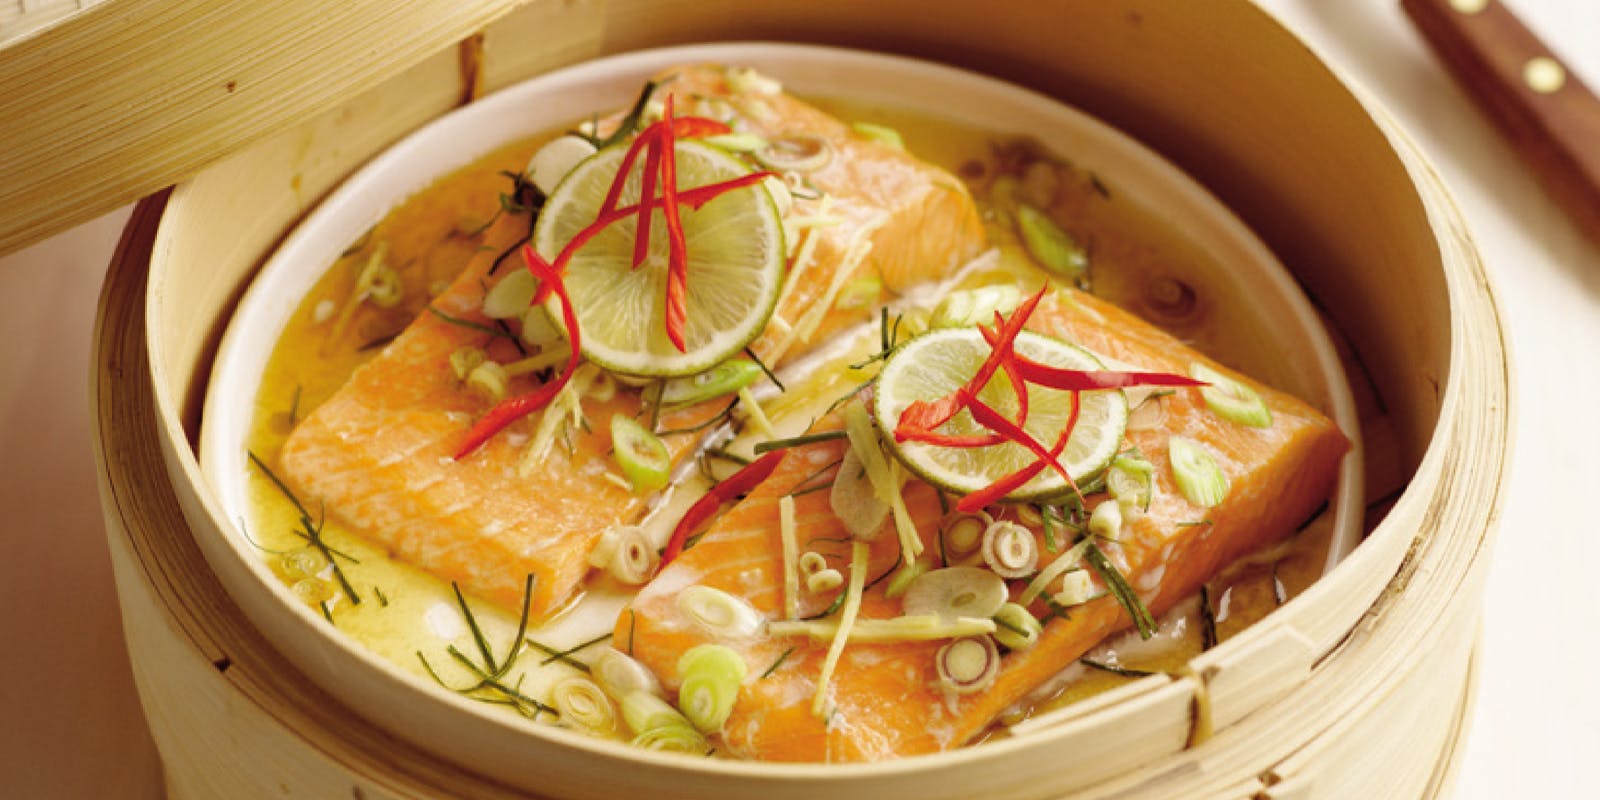 Steamed salmon with Thai sauce